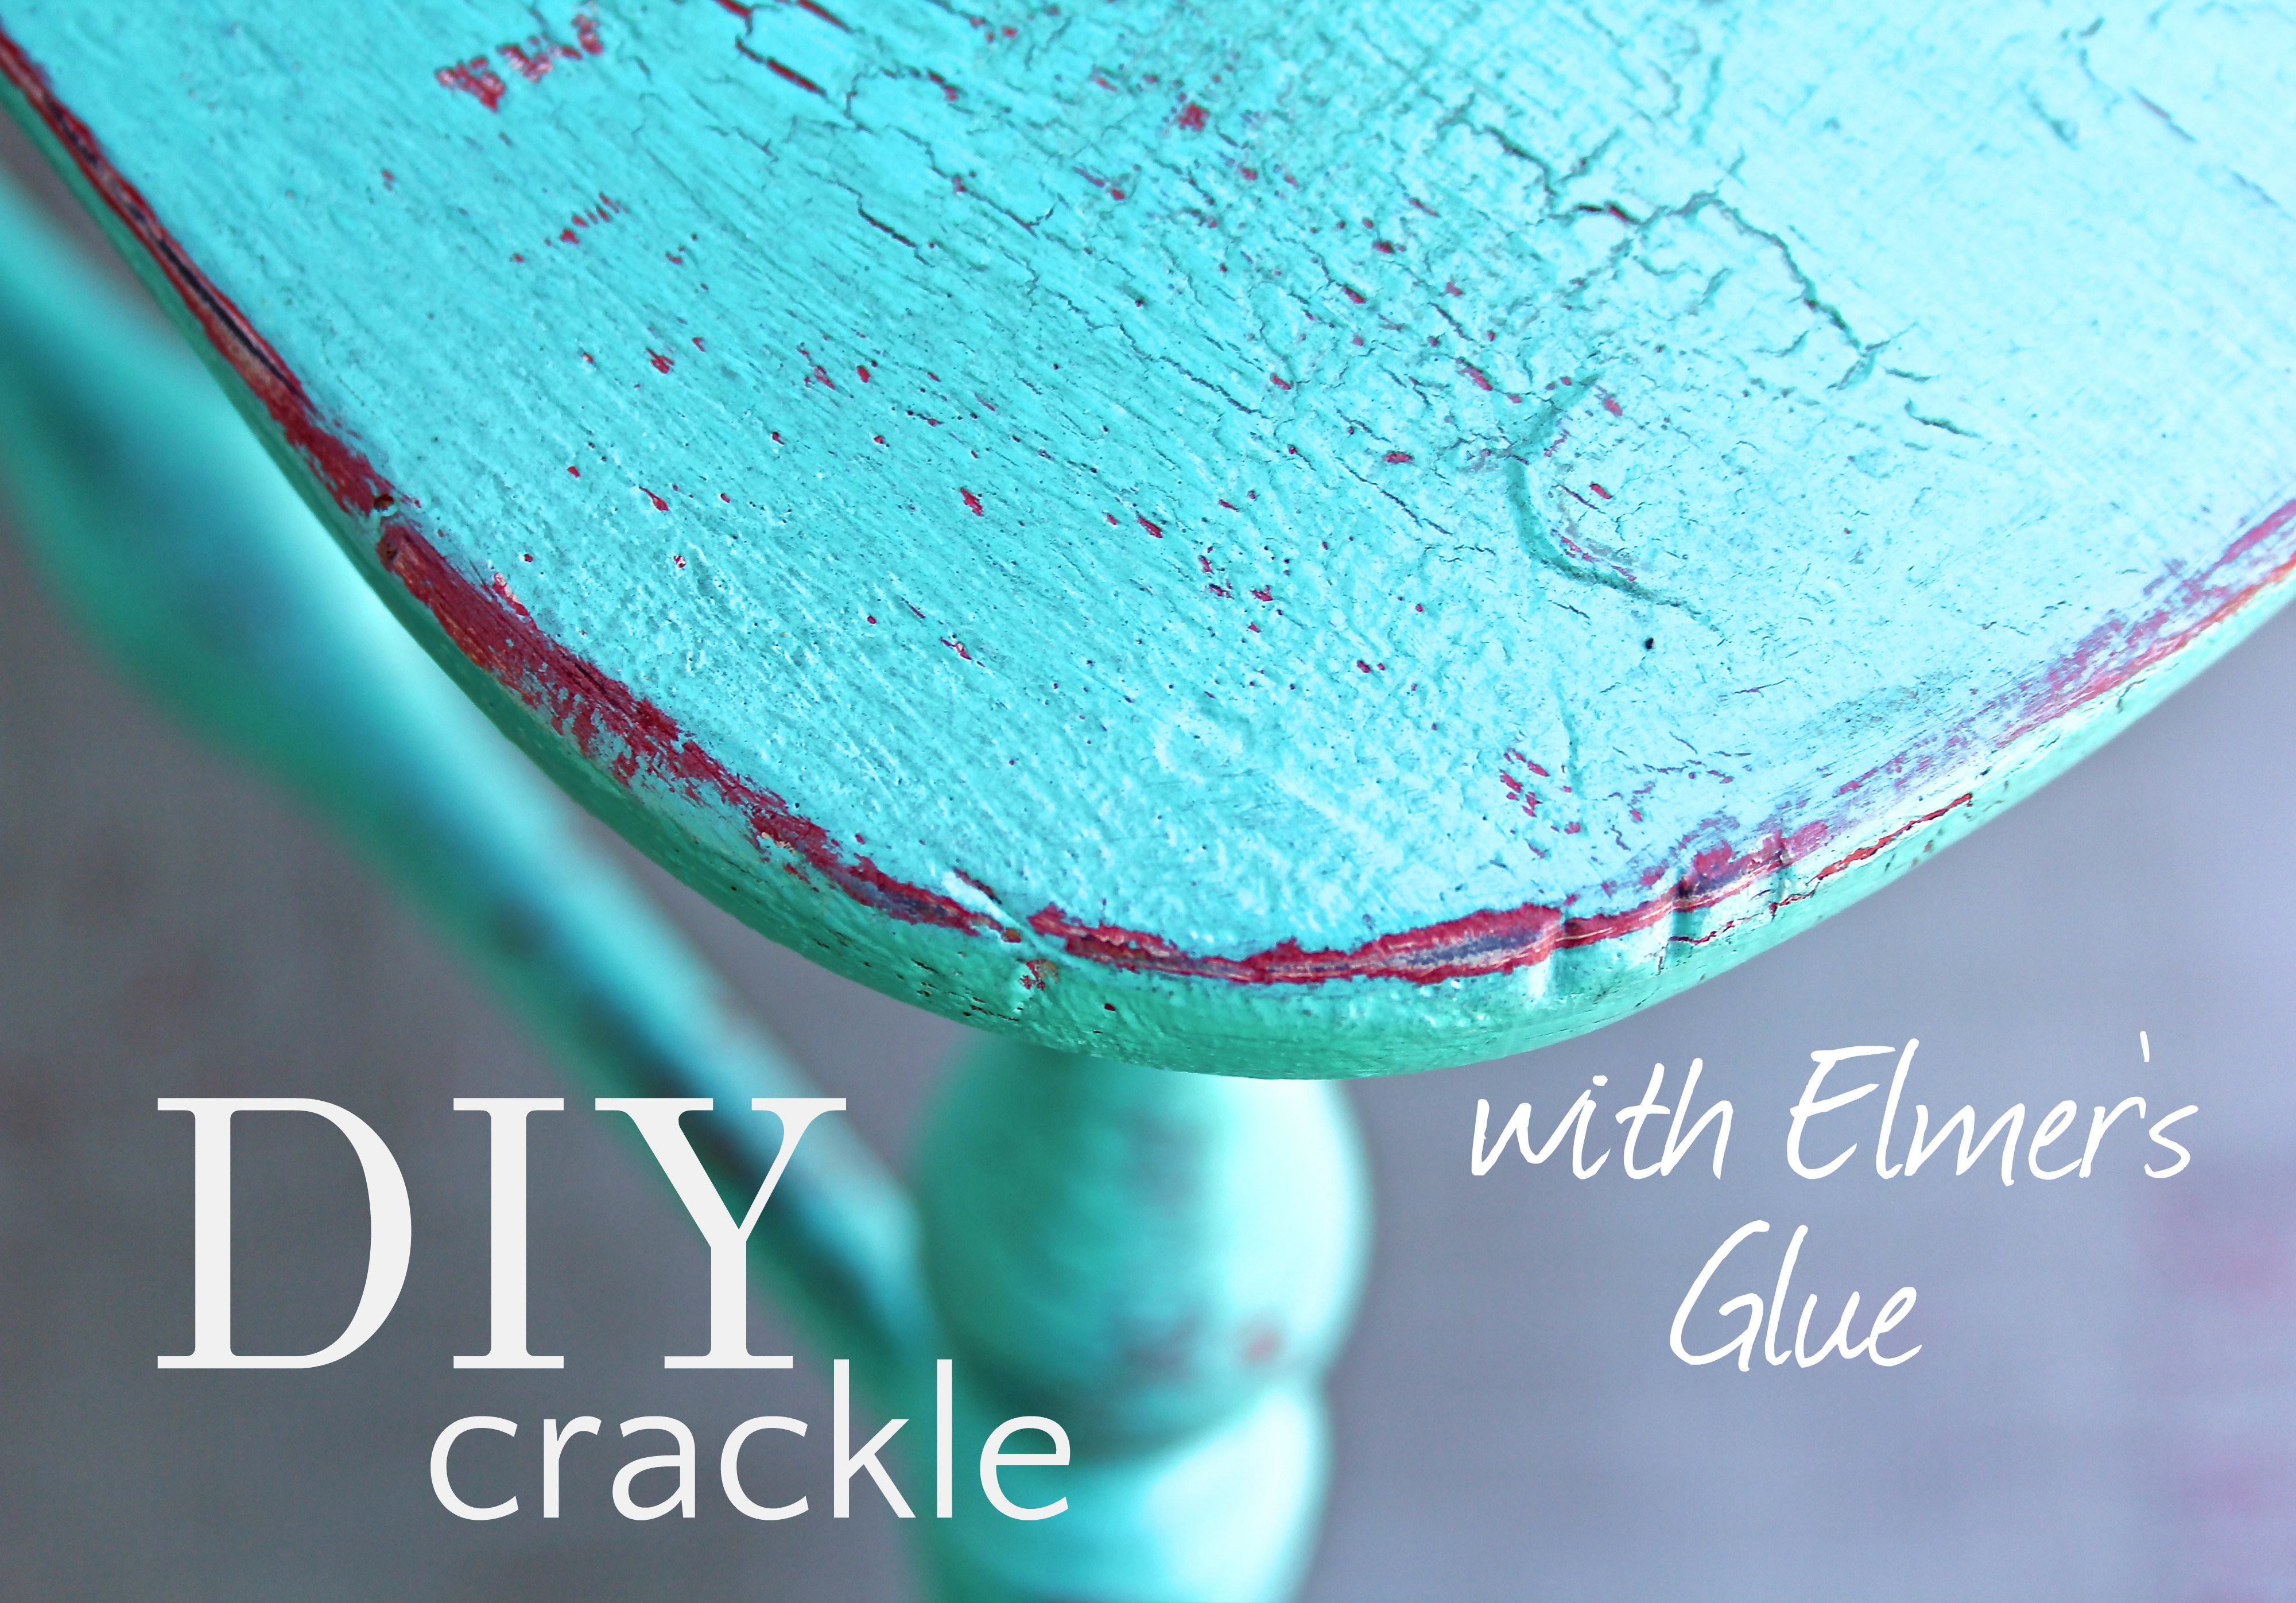 DIY Crackle Paint
 Crackle and distress your furniture Elmer’s glue and Chalk